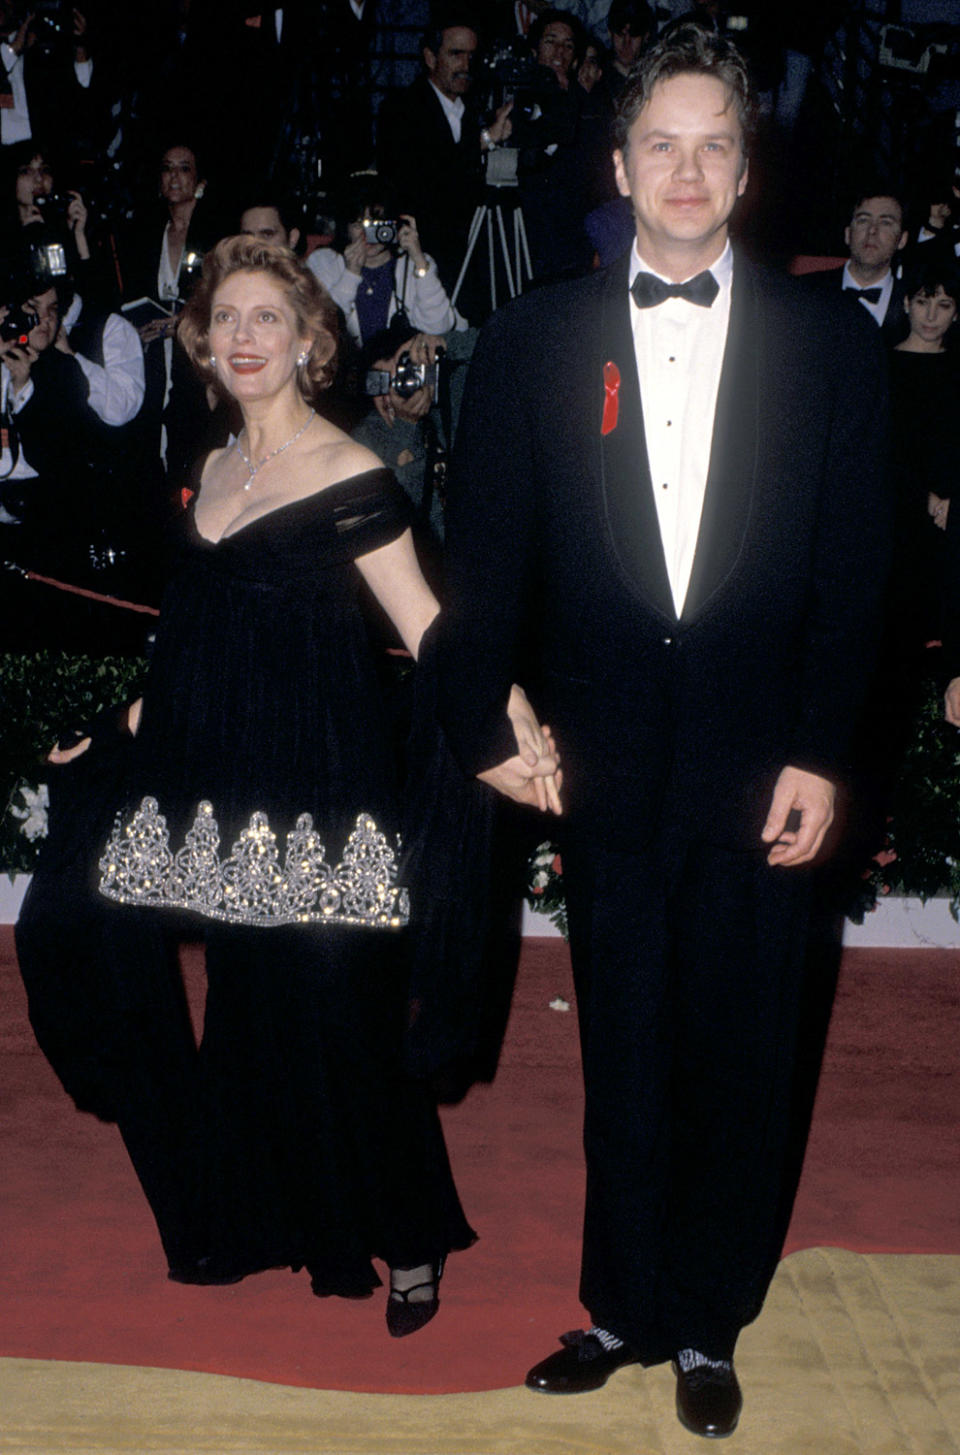 Though she didn't win the Best Actress award for Thelma & Louise at the 1992 Oscars, Sarandon had a pretty sweet consolation prize: She and her then-boyfriend Tim Robbins welcomed a son, Miles, five weeks later.